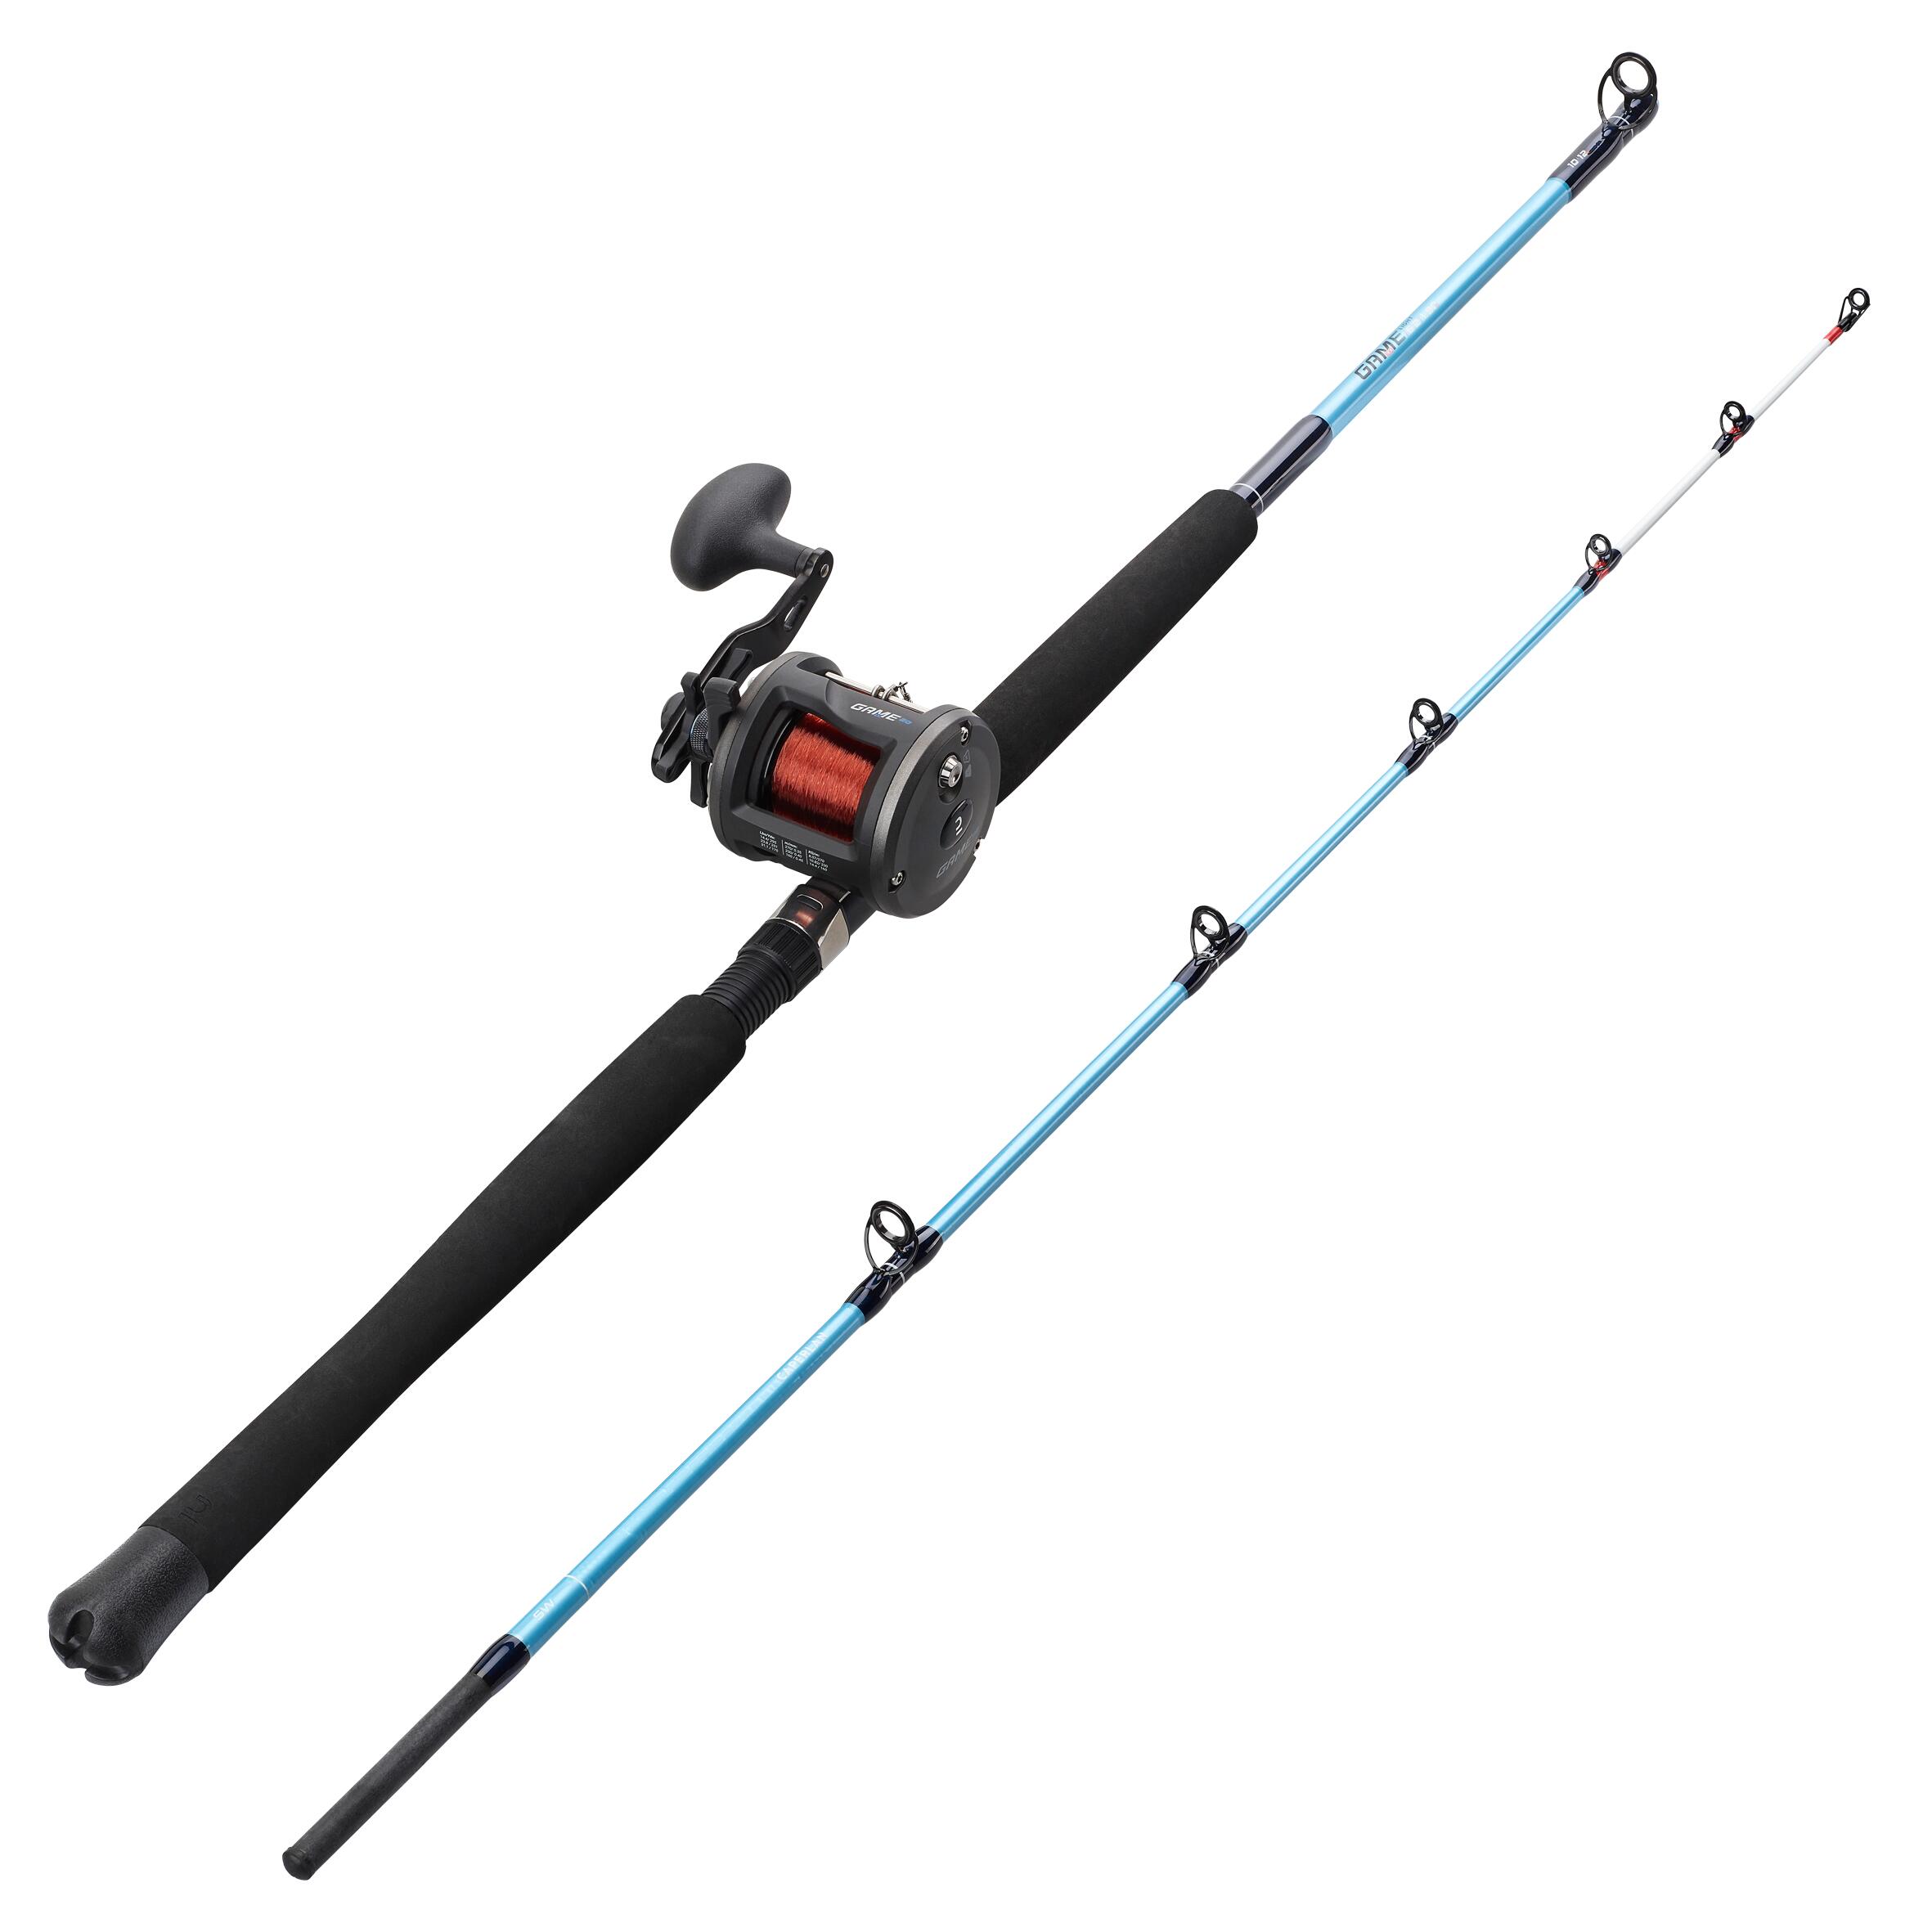 Trailing and sea fishing combo, COMBO GAME-100 190 10/12 LBS CAPERLAN